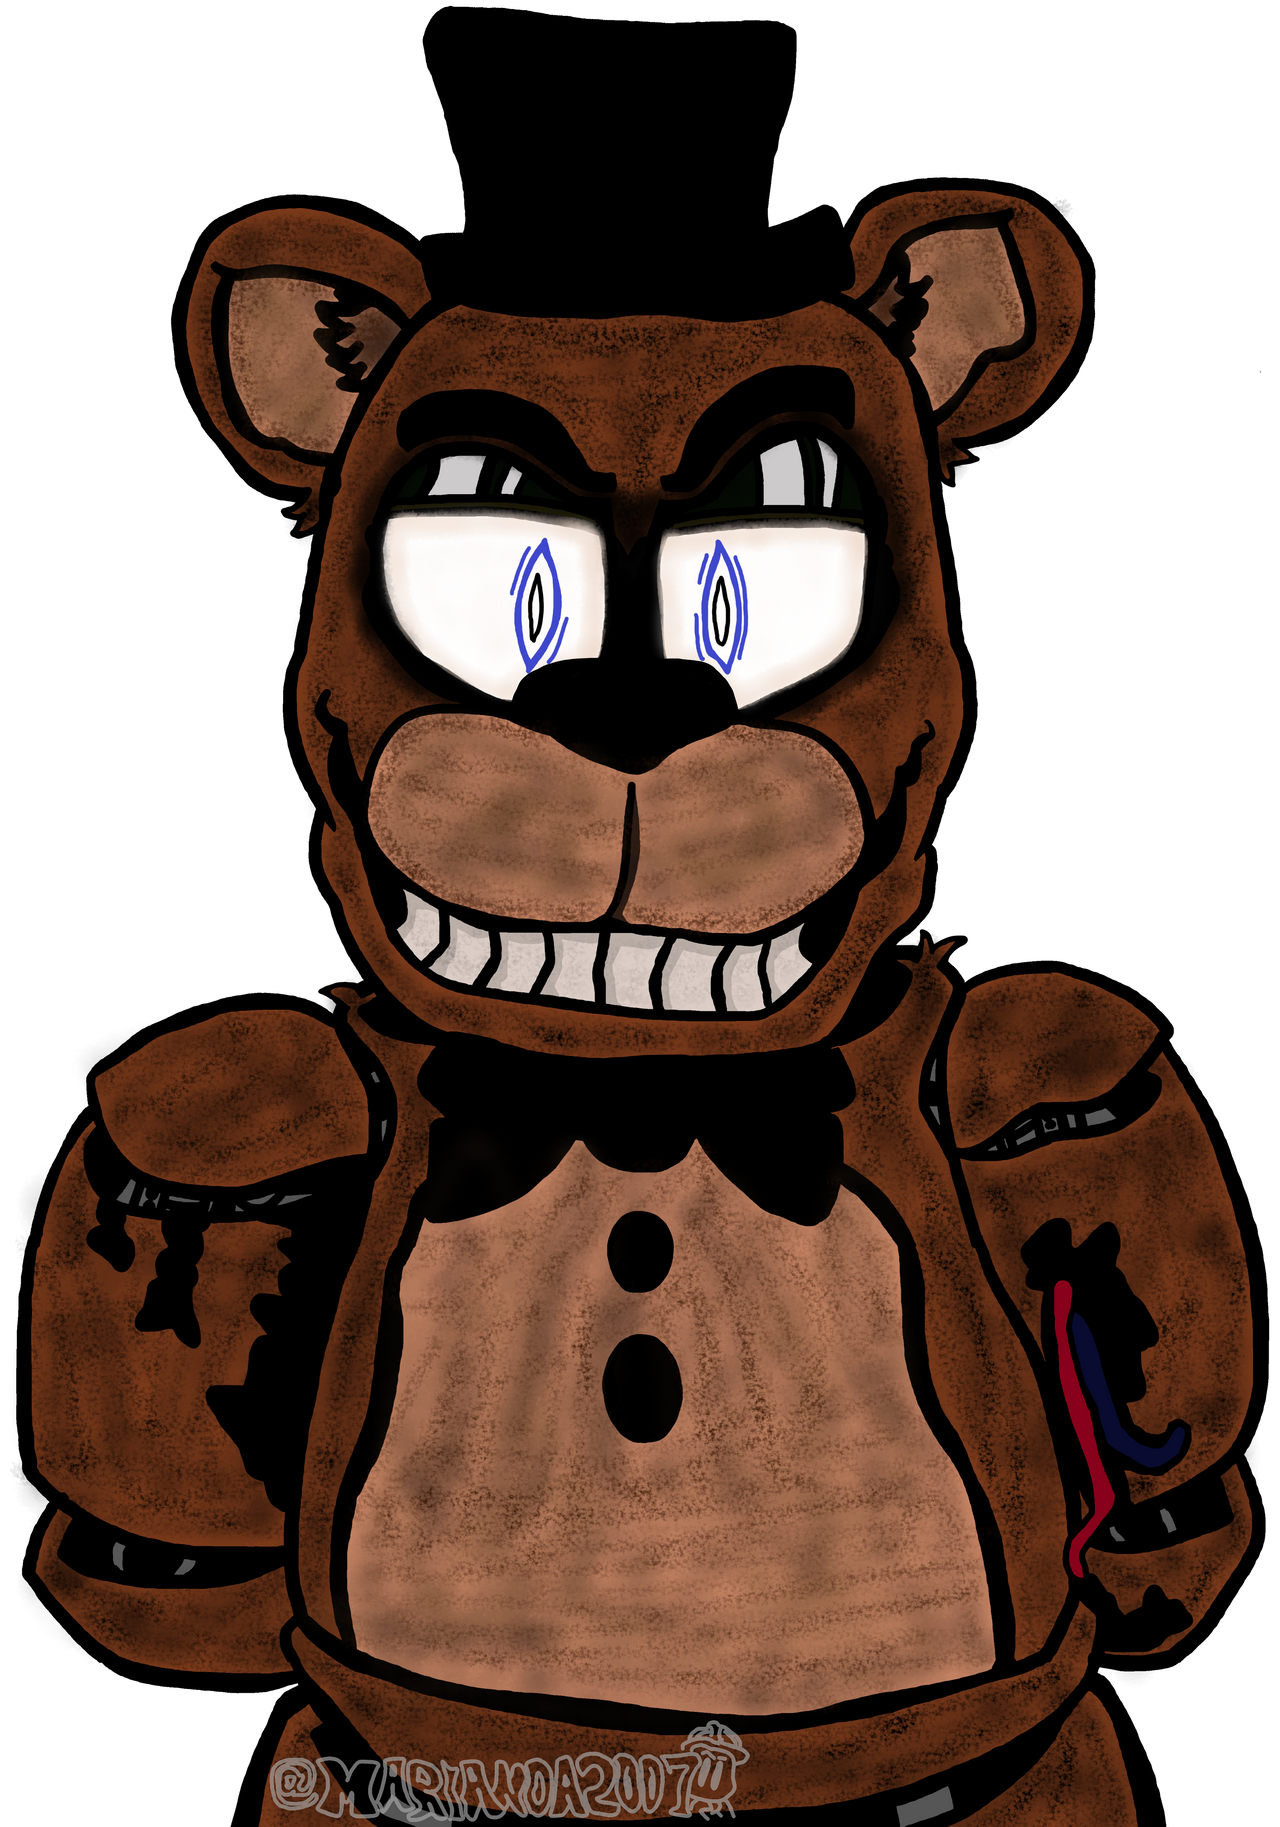 Withered freddy Fanart by marianoa2007 on DeviantArt